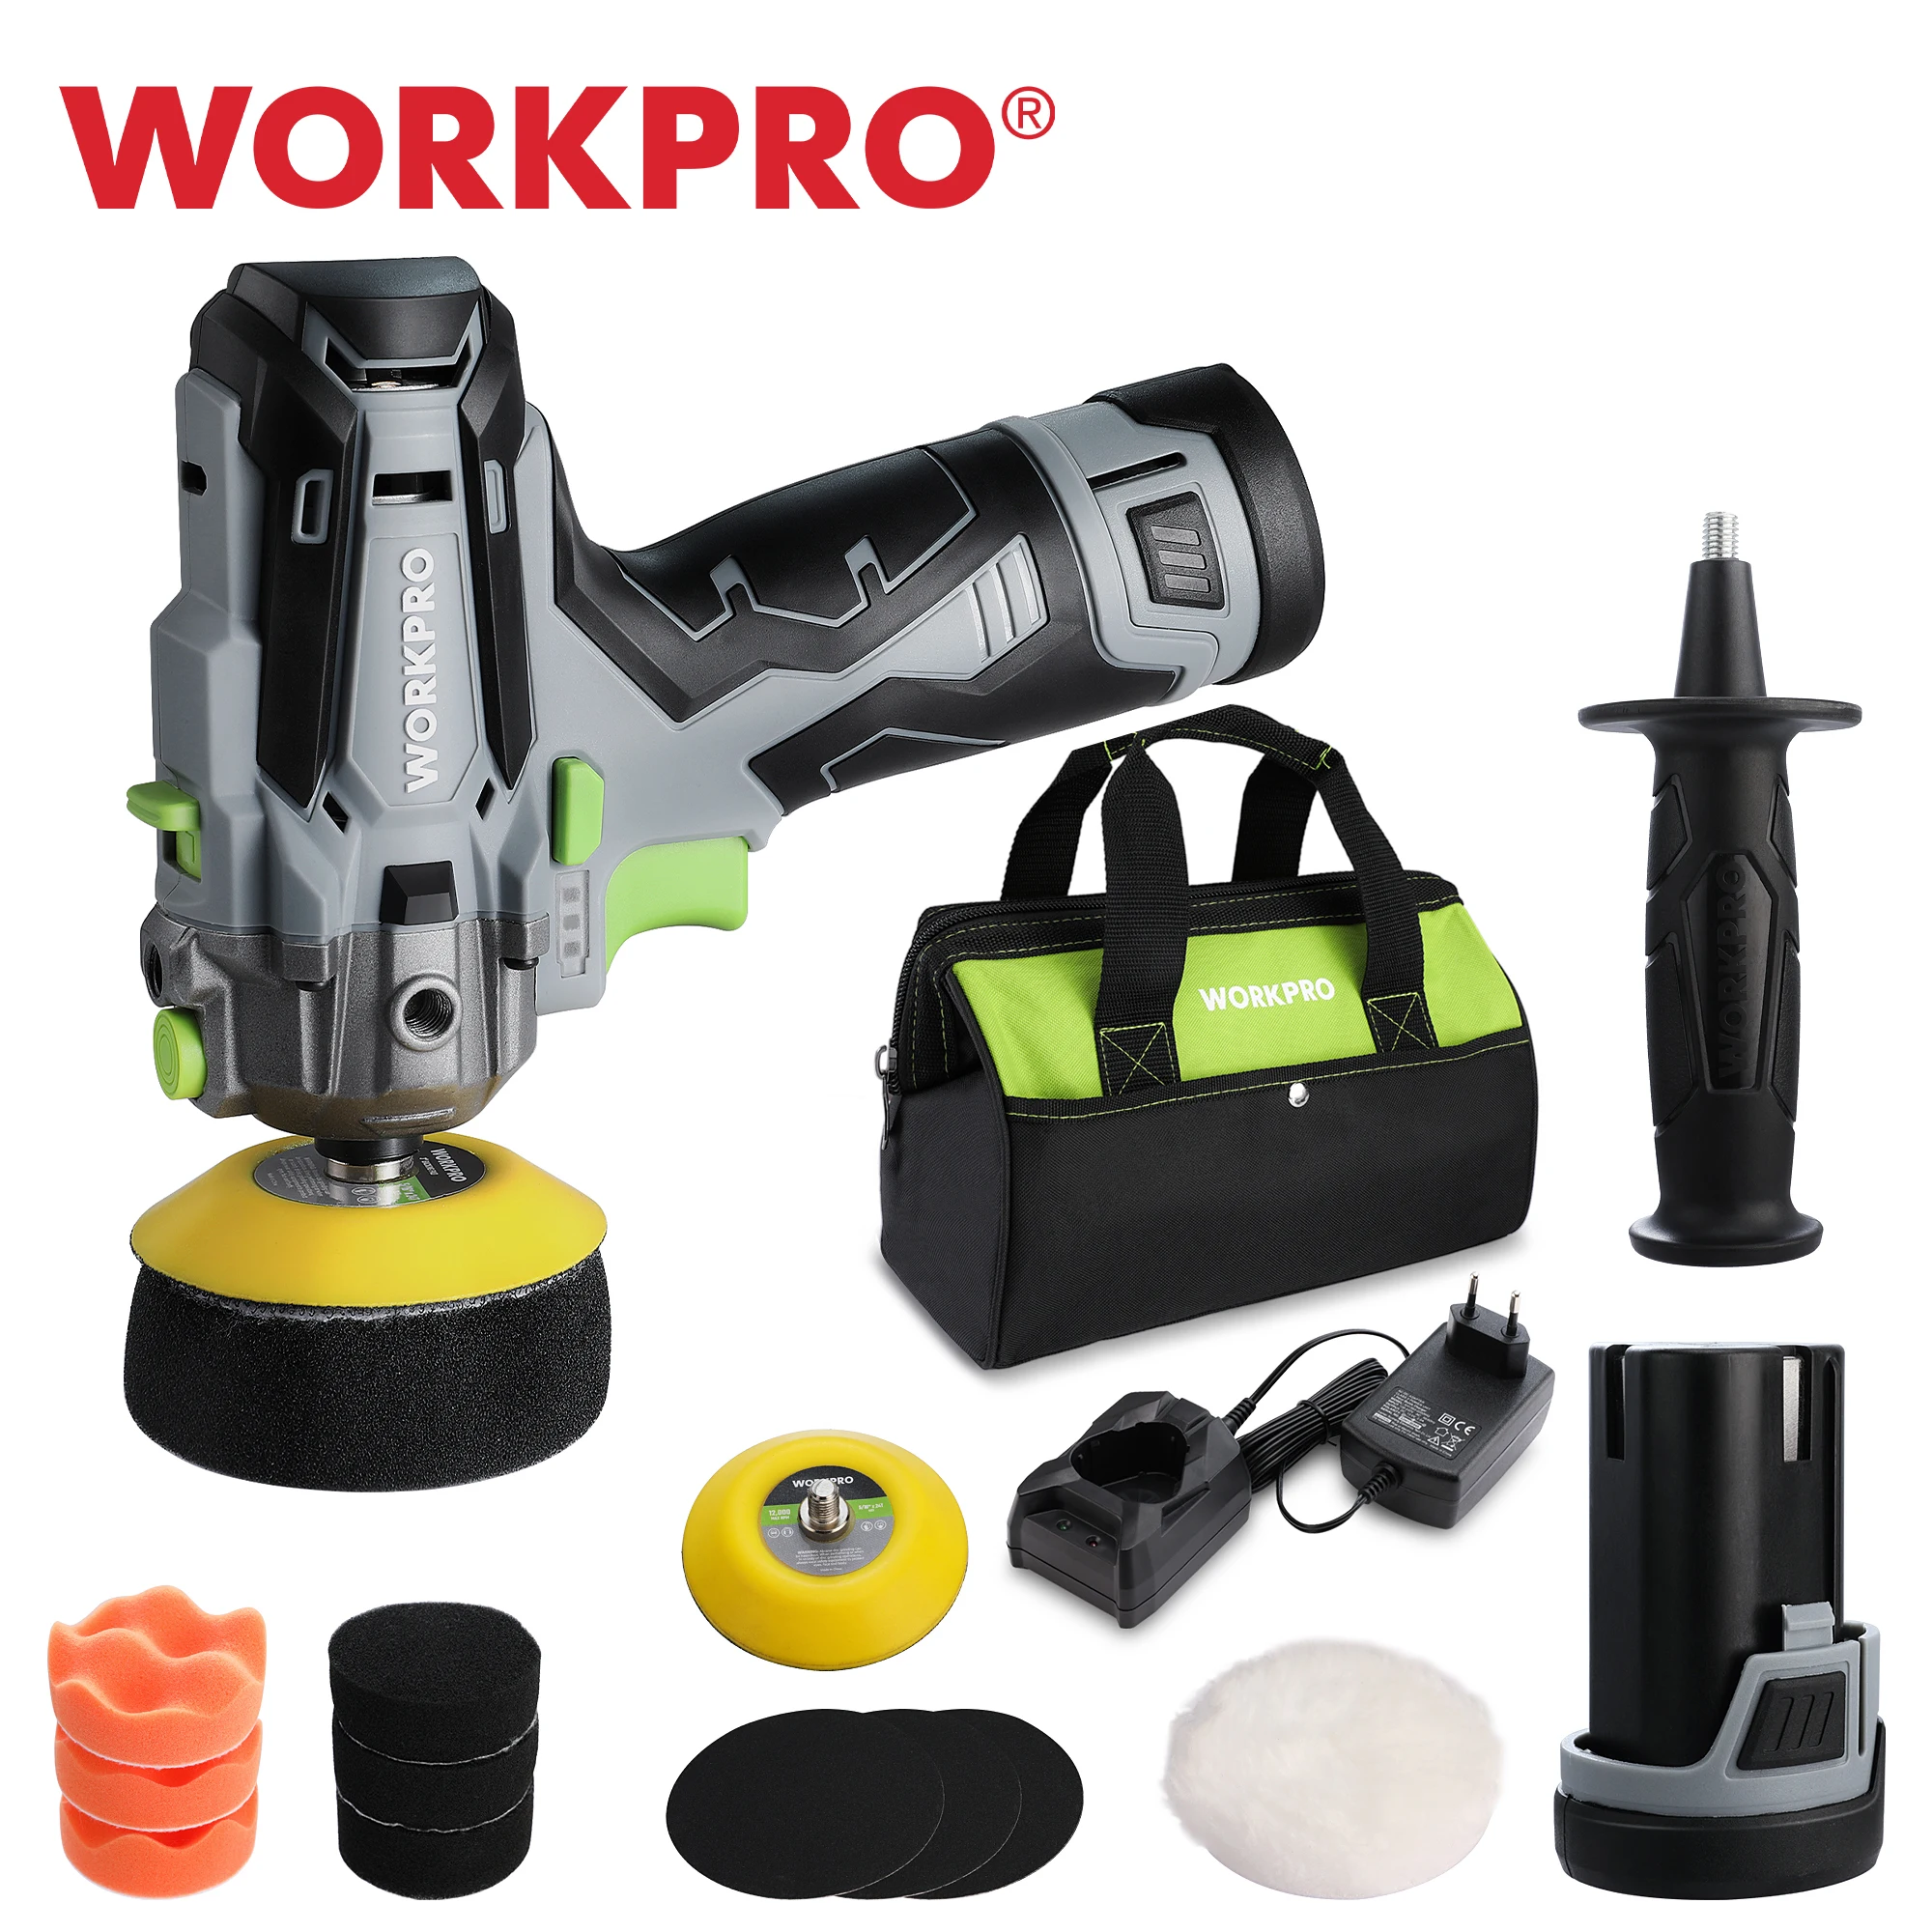 WORKPRO 12V Cordless Mini Car Detailing Polisher Scratches Killer Detailing RO DA Machine 3 Inch Pads Accessories 2 Battery